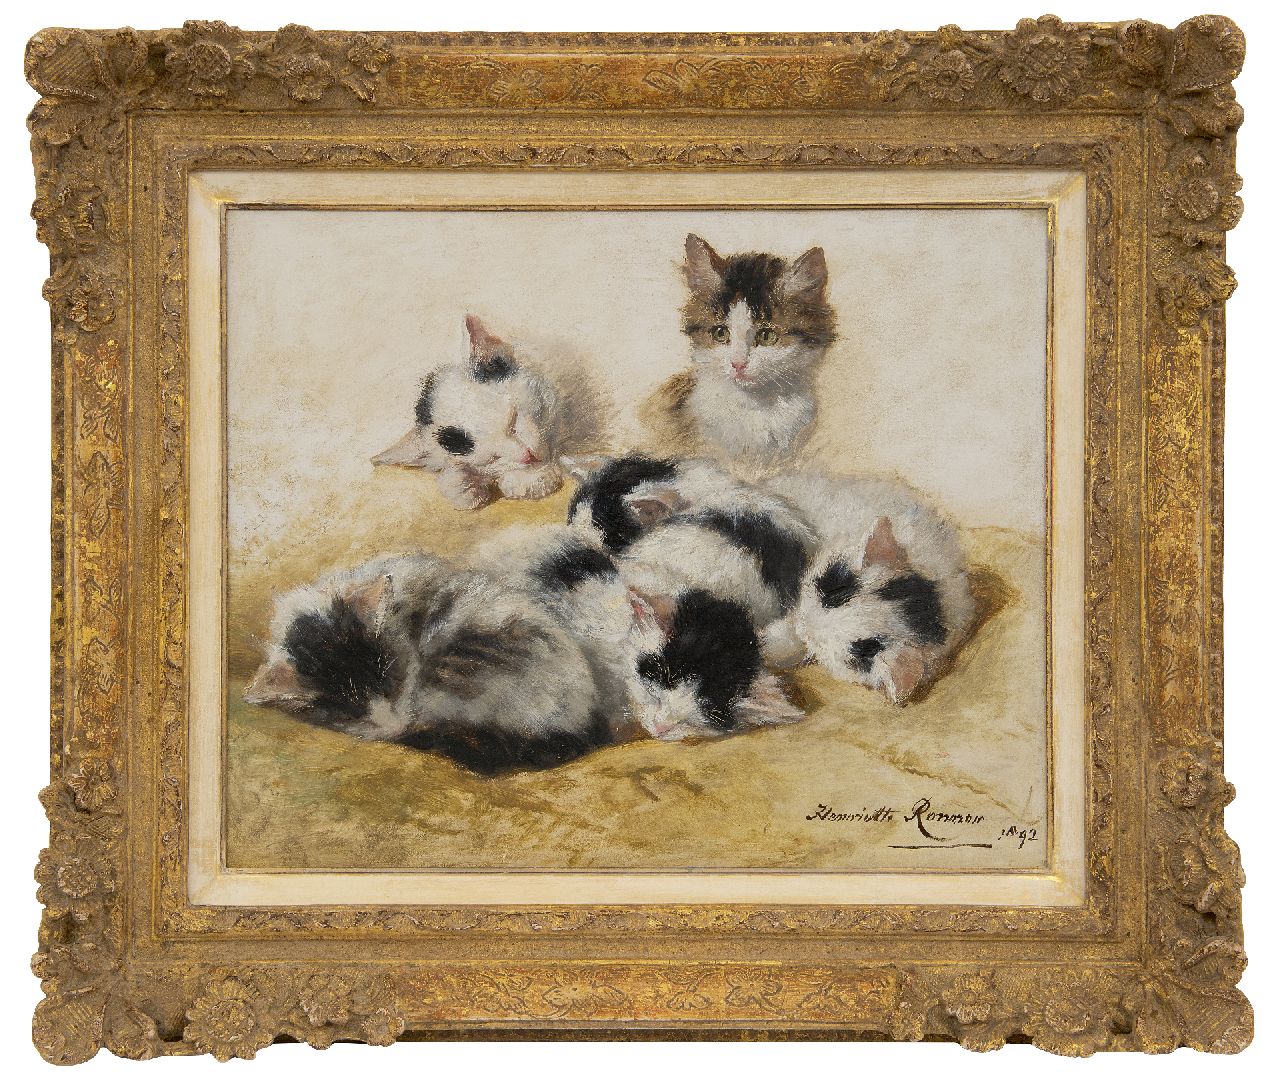 Ronner-Knip H.  | Henriette Ronner-Knip, Young kittens, oil on panel 32.2 x 40.3 cm, signed l.r. and dated 1892